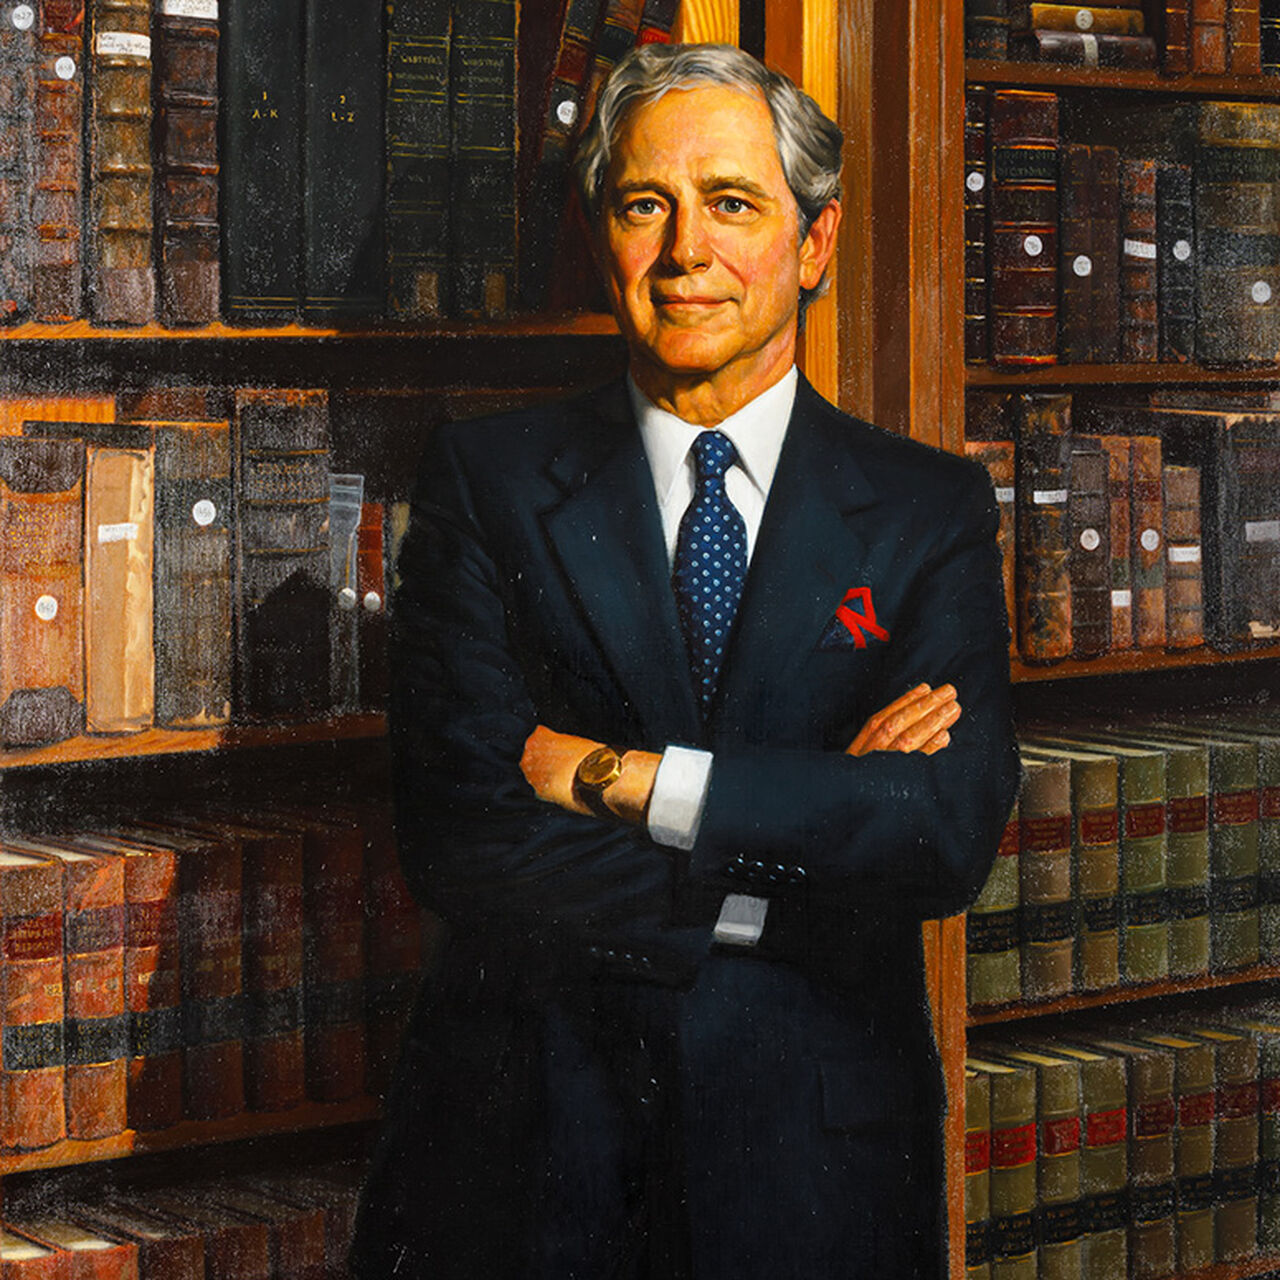 Portrait of Edward J. Bloustein standing in front of bookcase image number 0